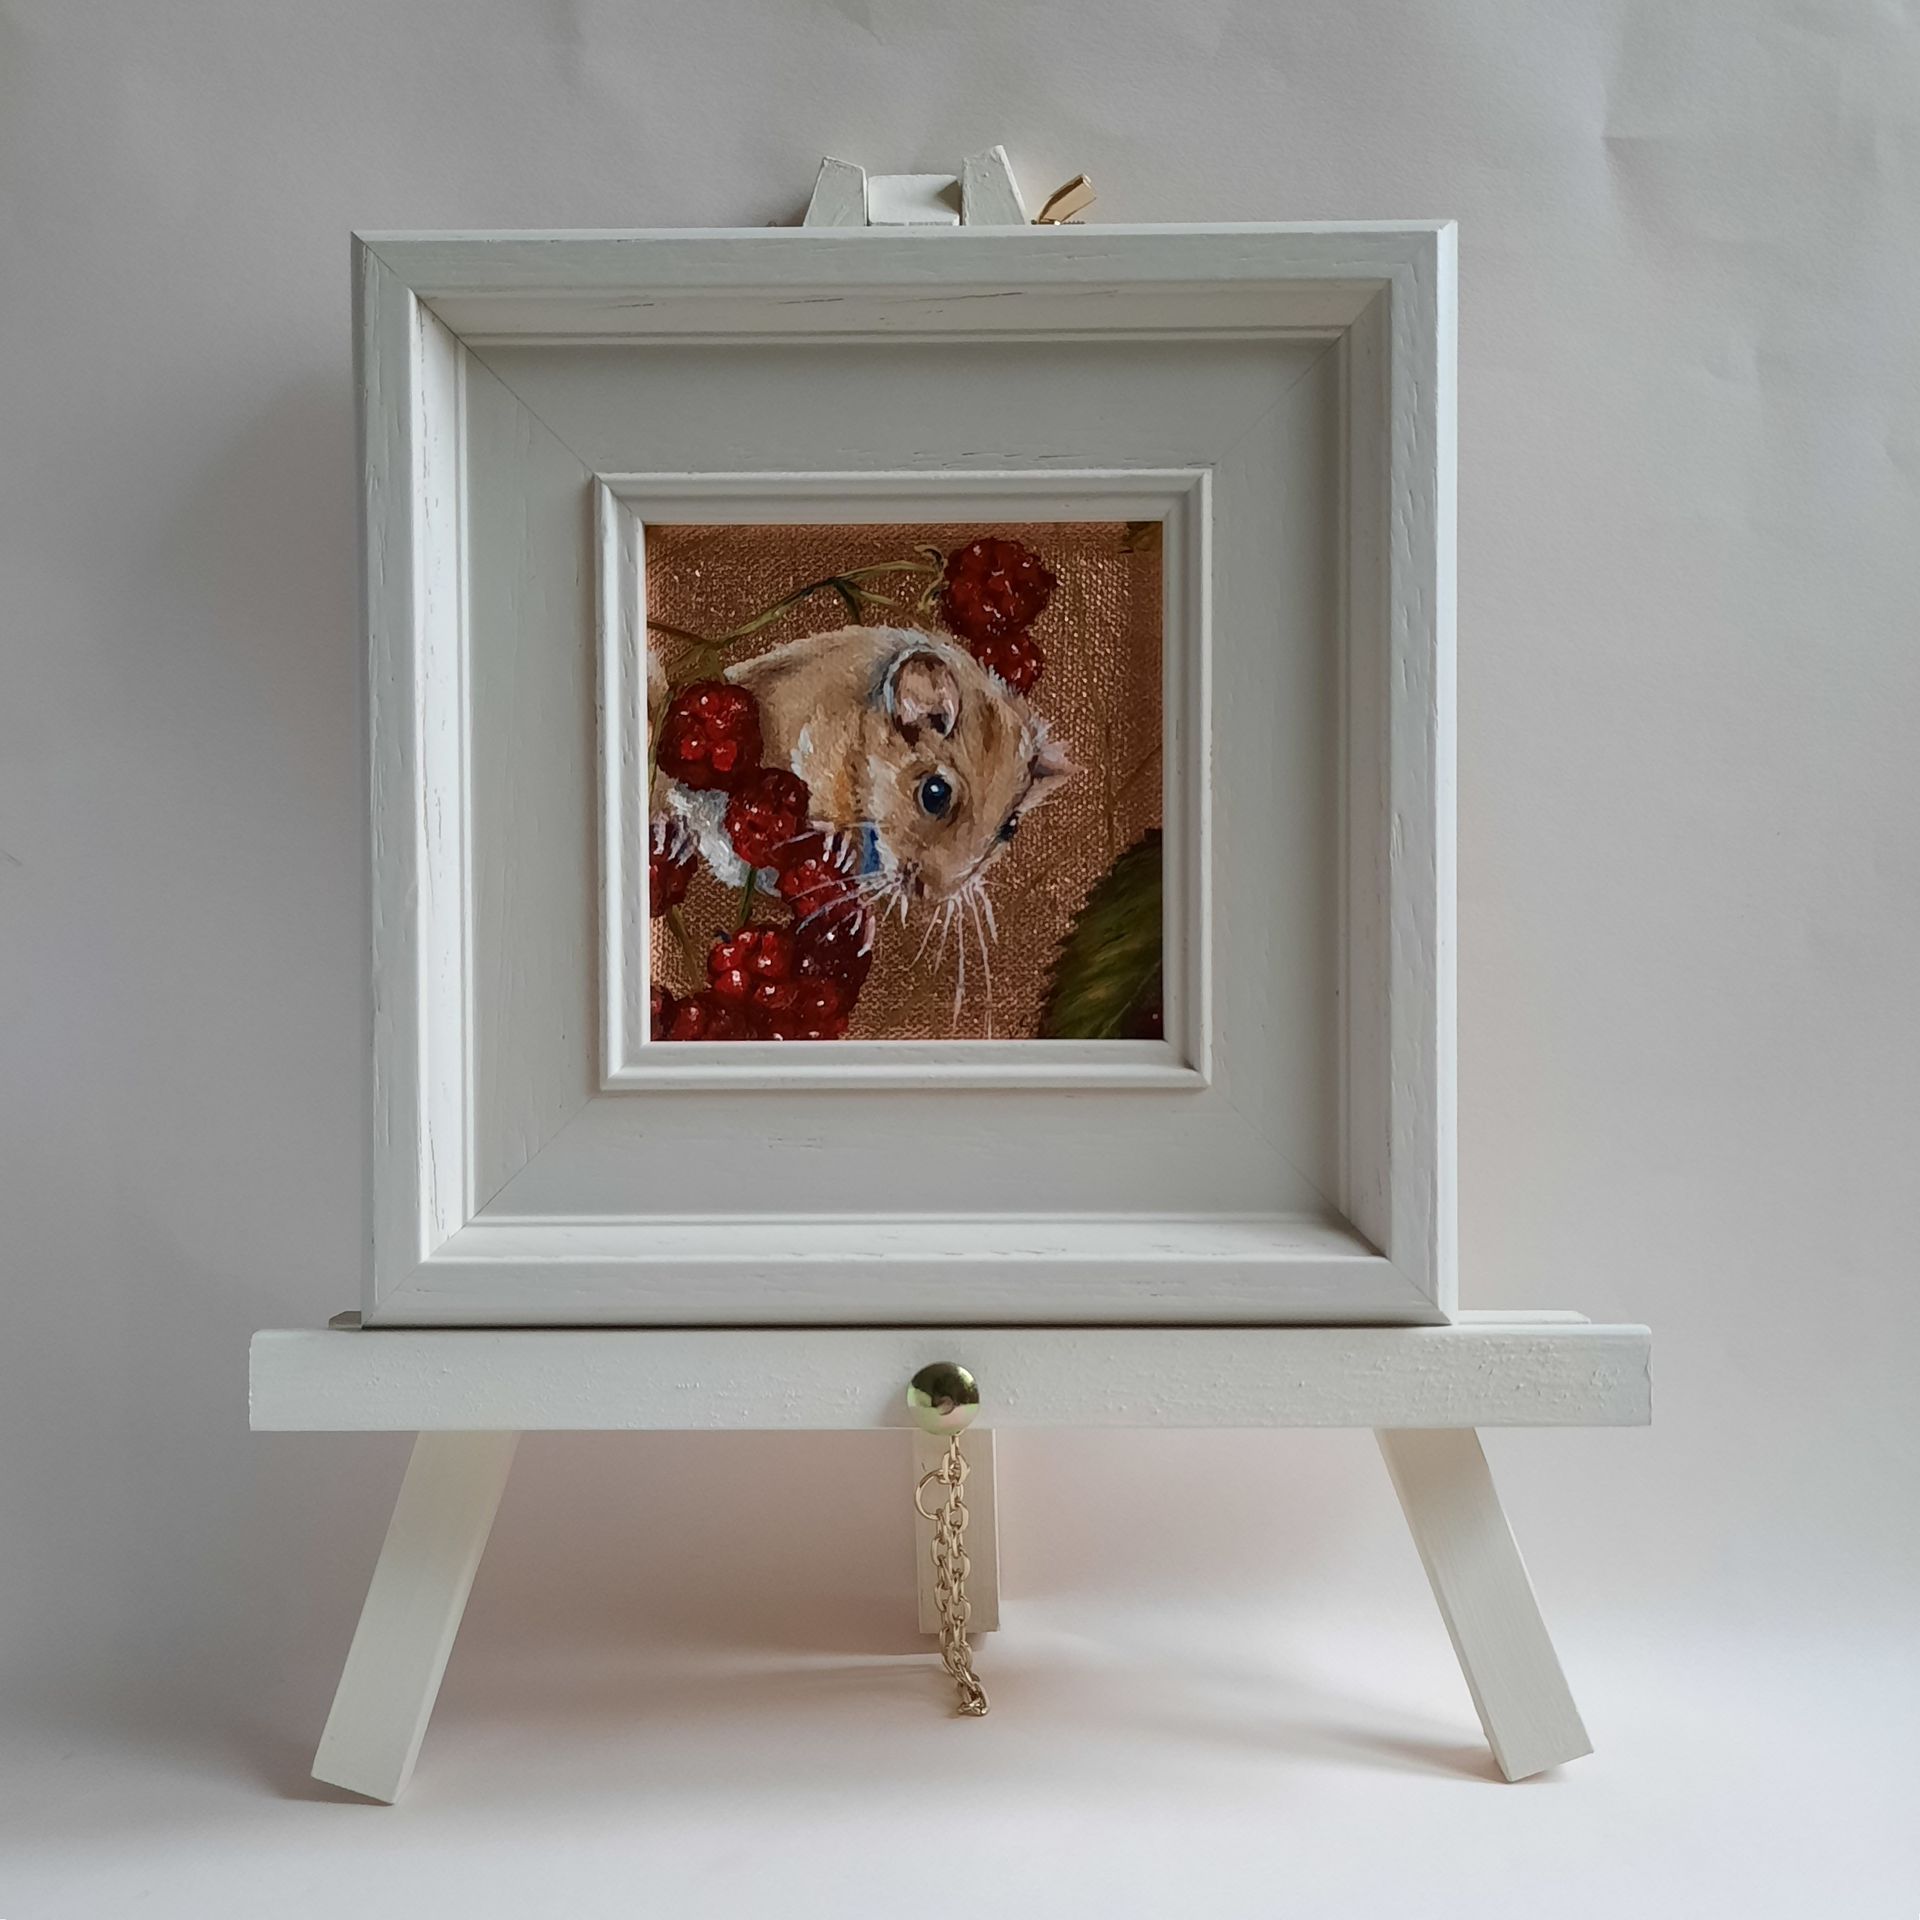 An oil painting of a plump Dormouse holding on to a sprig of red brambles. The edge of a green leaf can be made out in the bottom right corner. The painting is on shiny copper leaf and is shown framed in a cream coloured frame on a matching mini easel